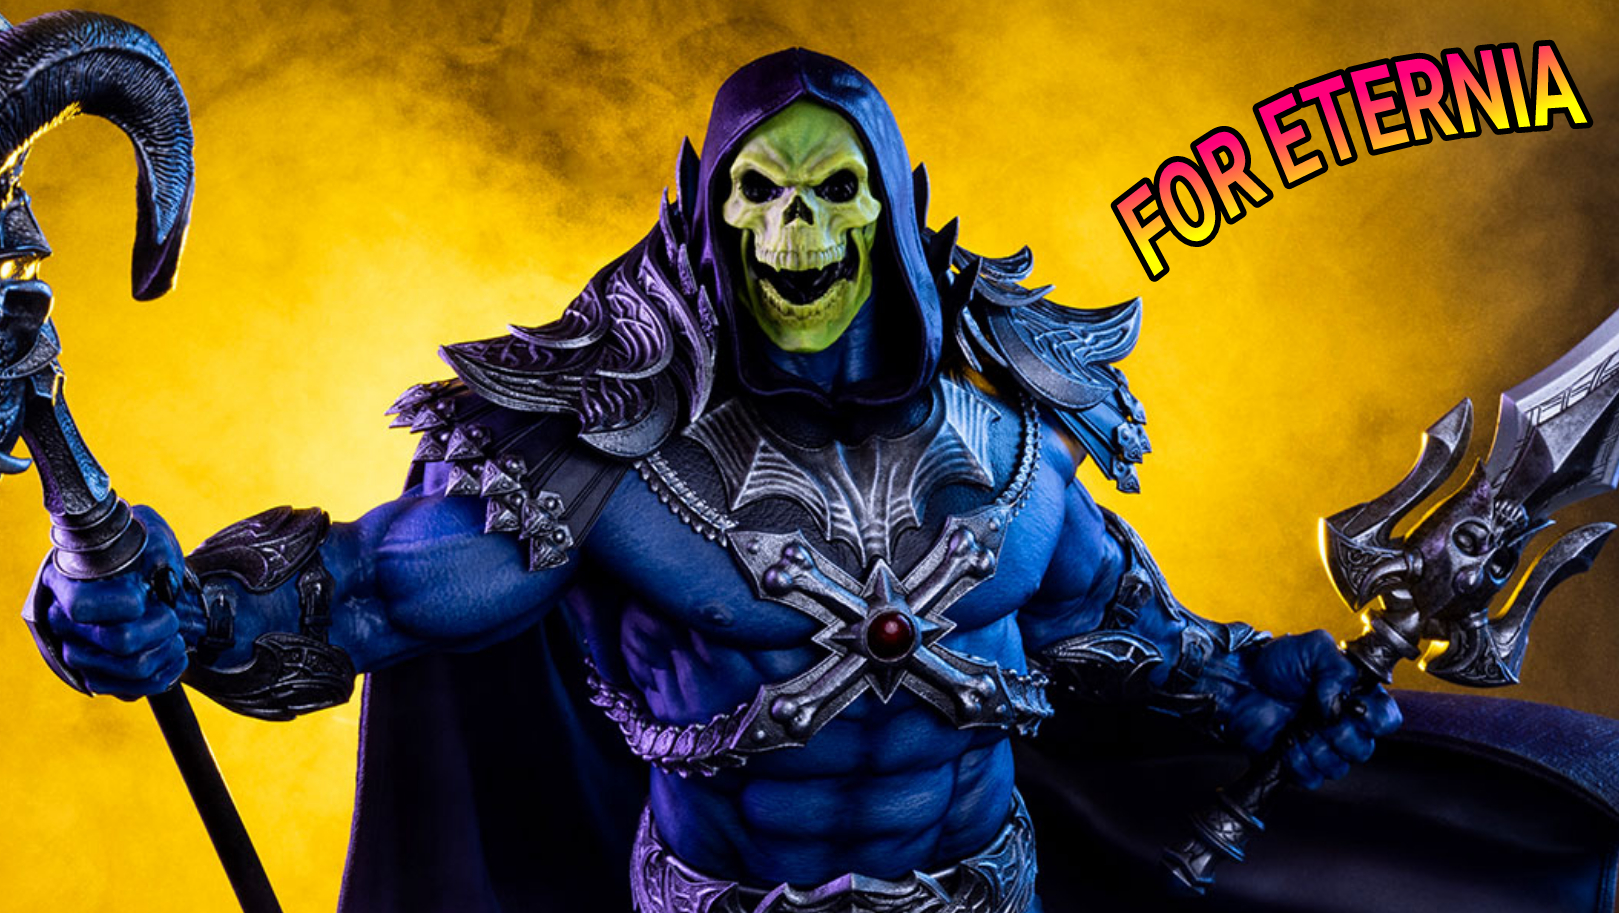 ”Skeletor Legends” Tweeterhead 1:5 Scale Maquette now available to Pre-Order